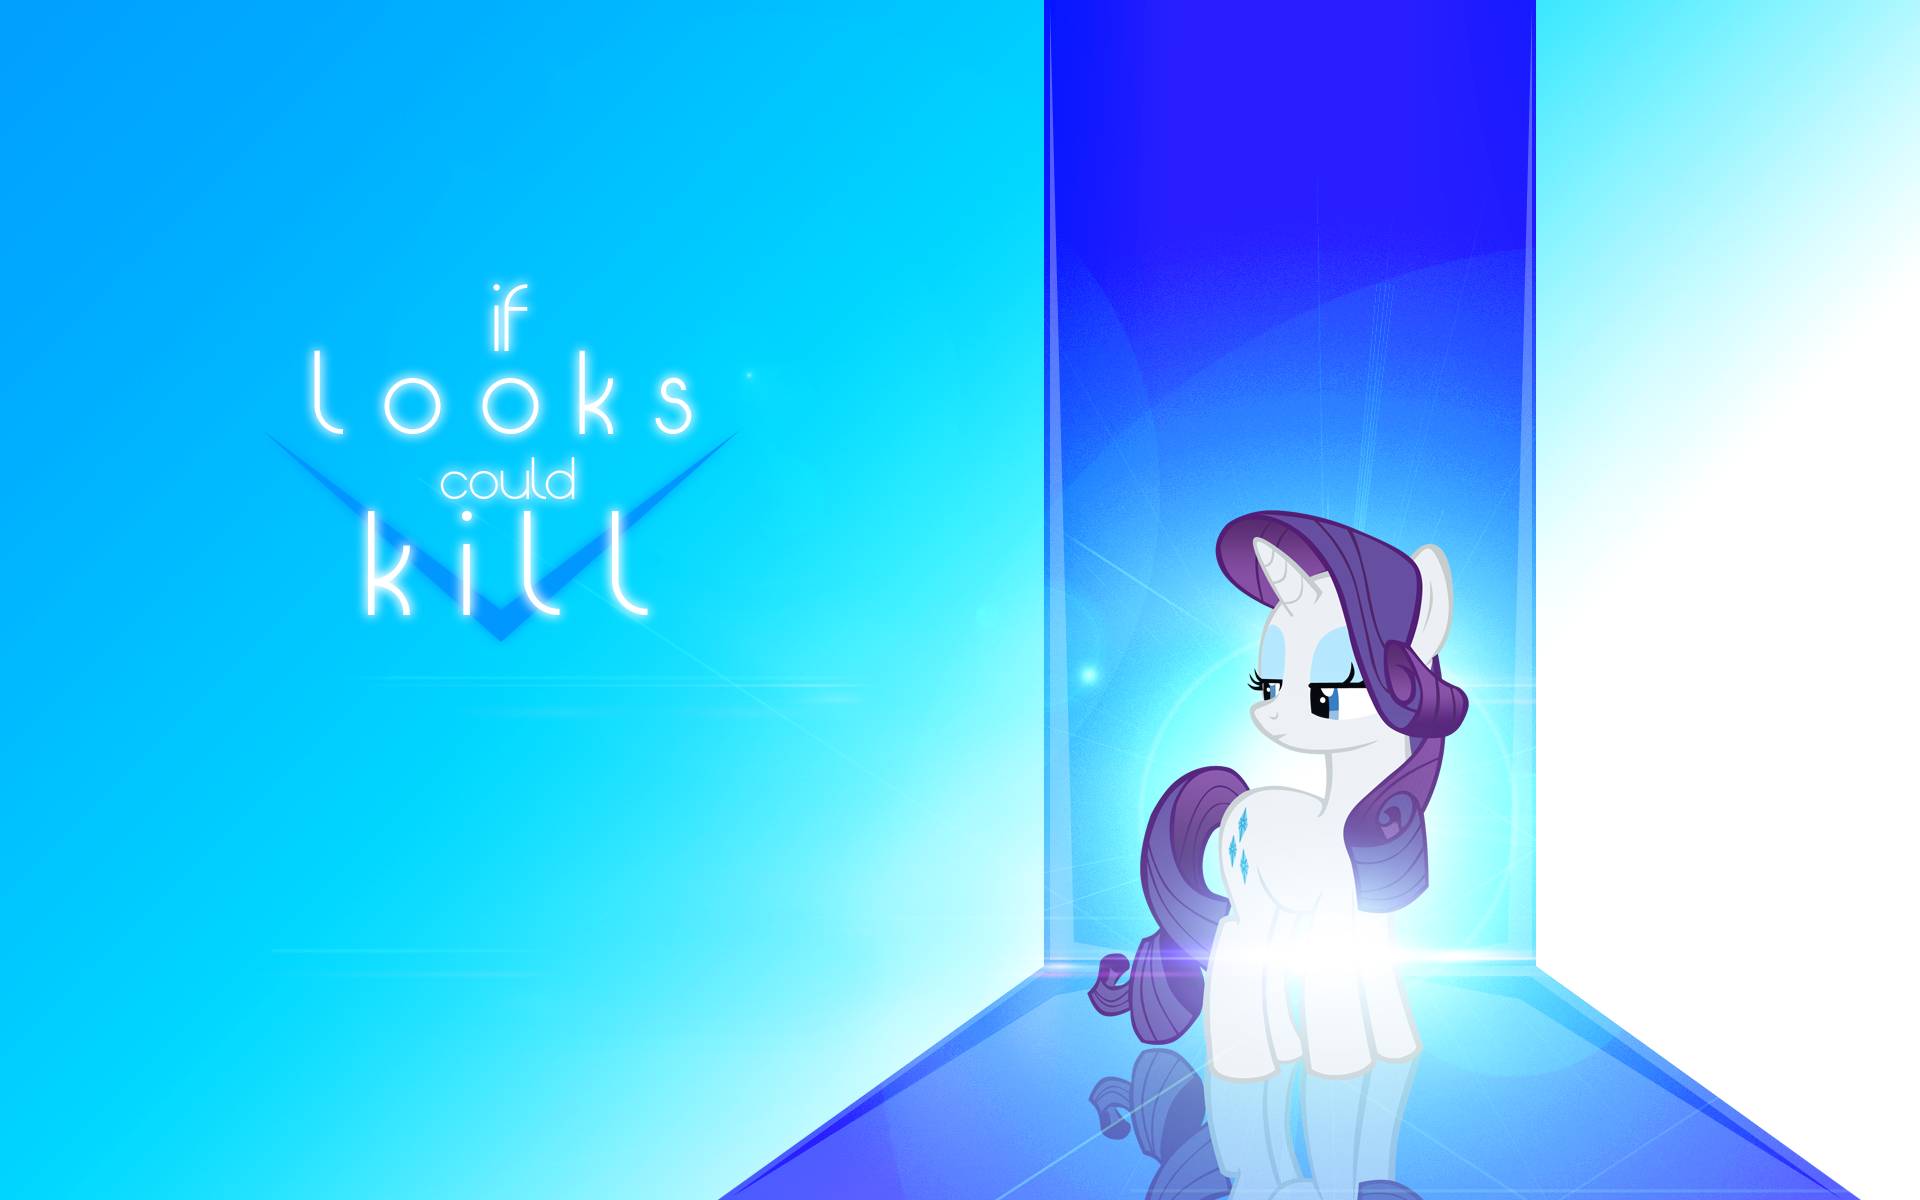 If Looks Could Kill (For MikoyaNx) by Emper0rPenguin and Takua770